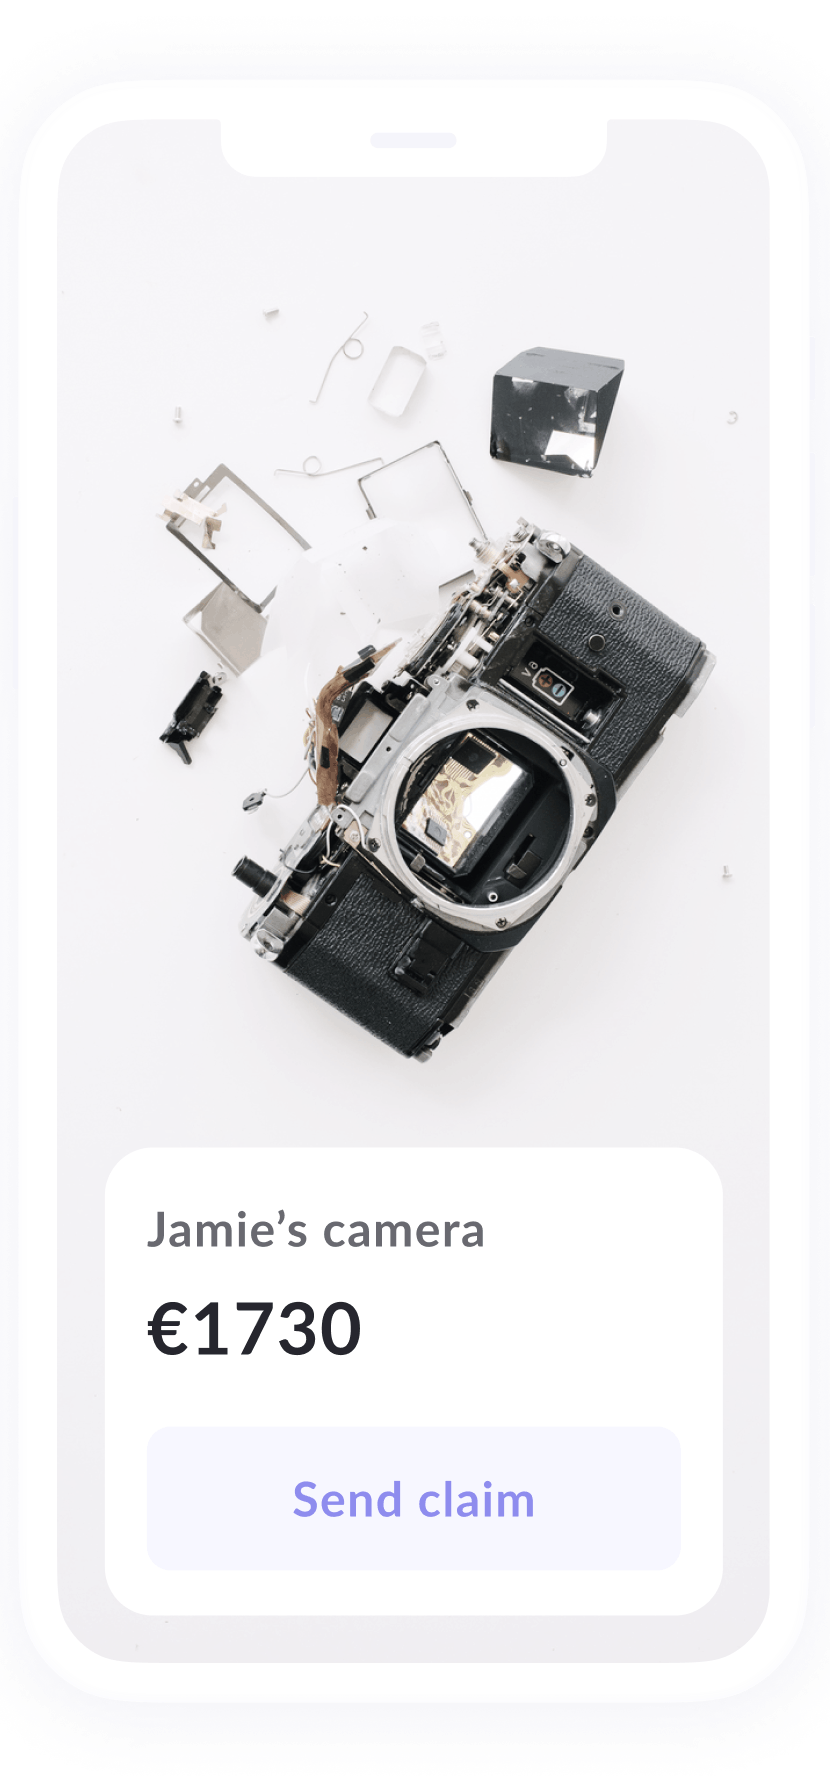 Phone with photo of broken camera